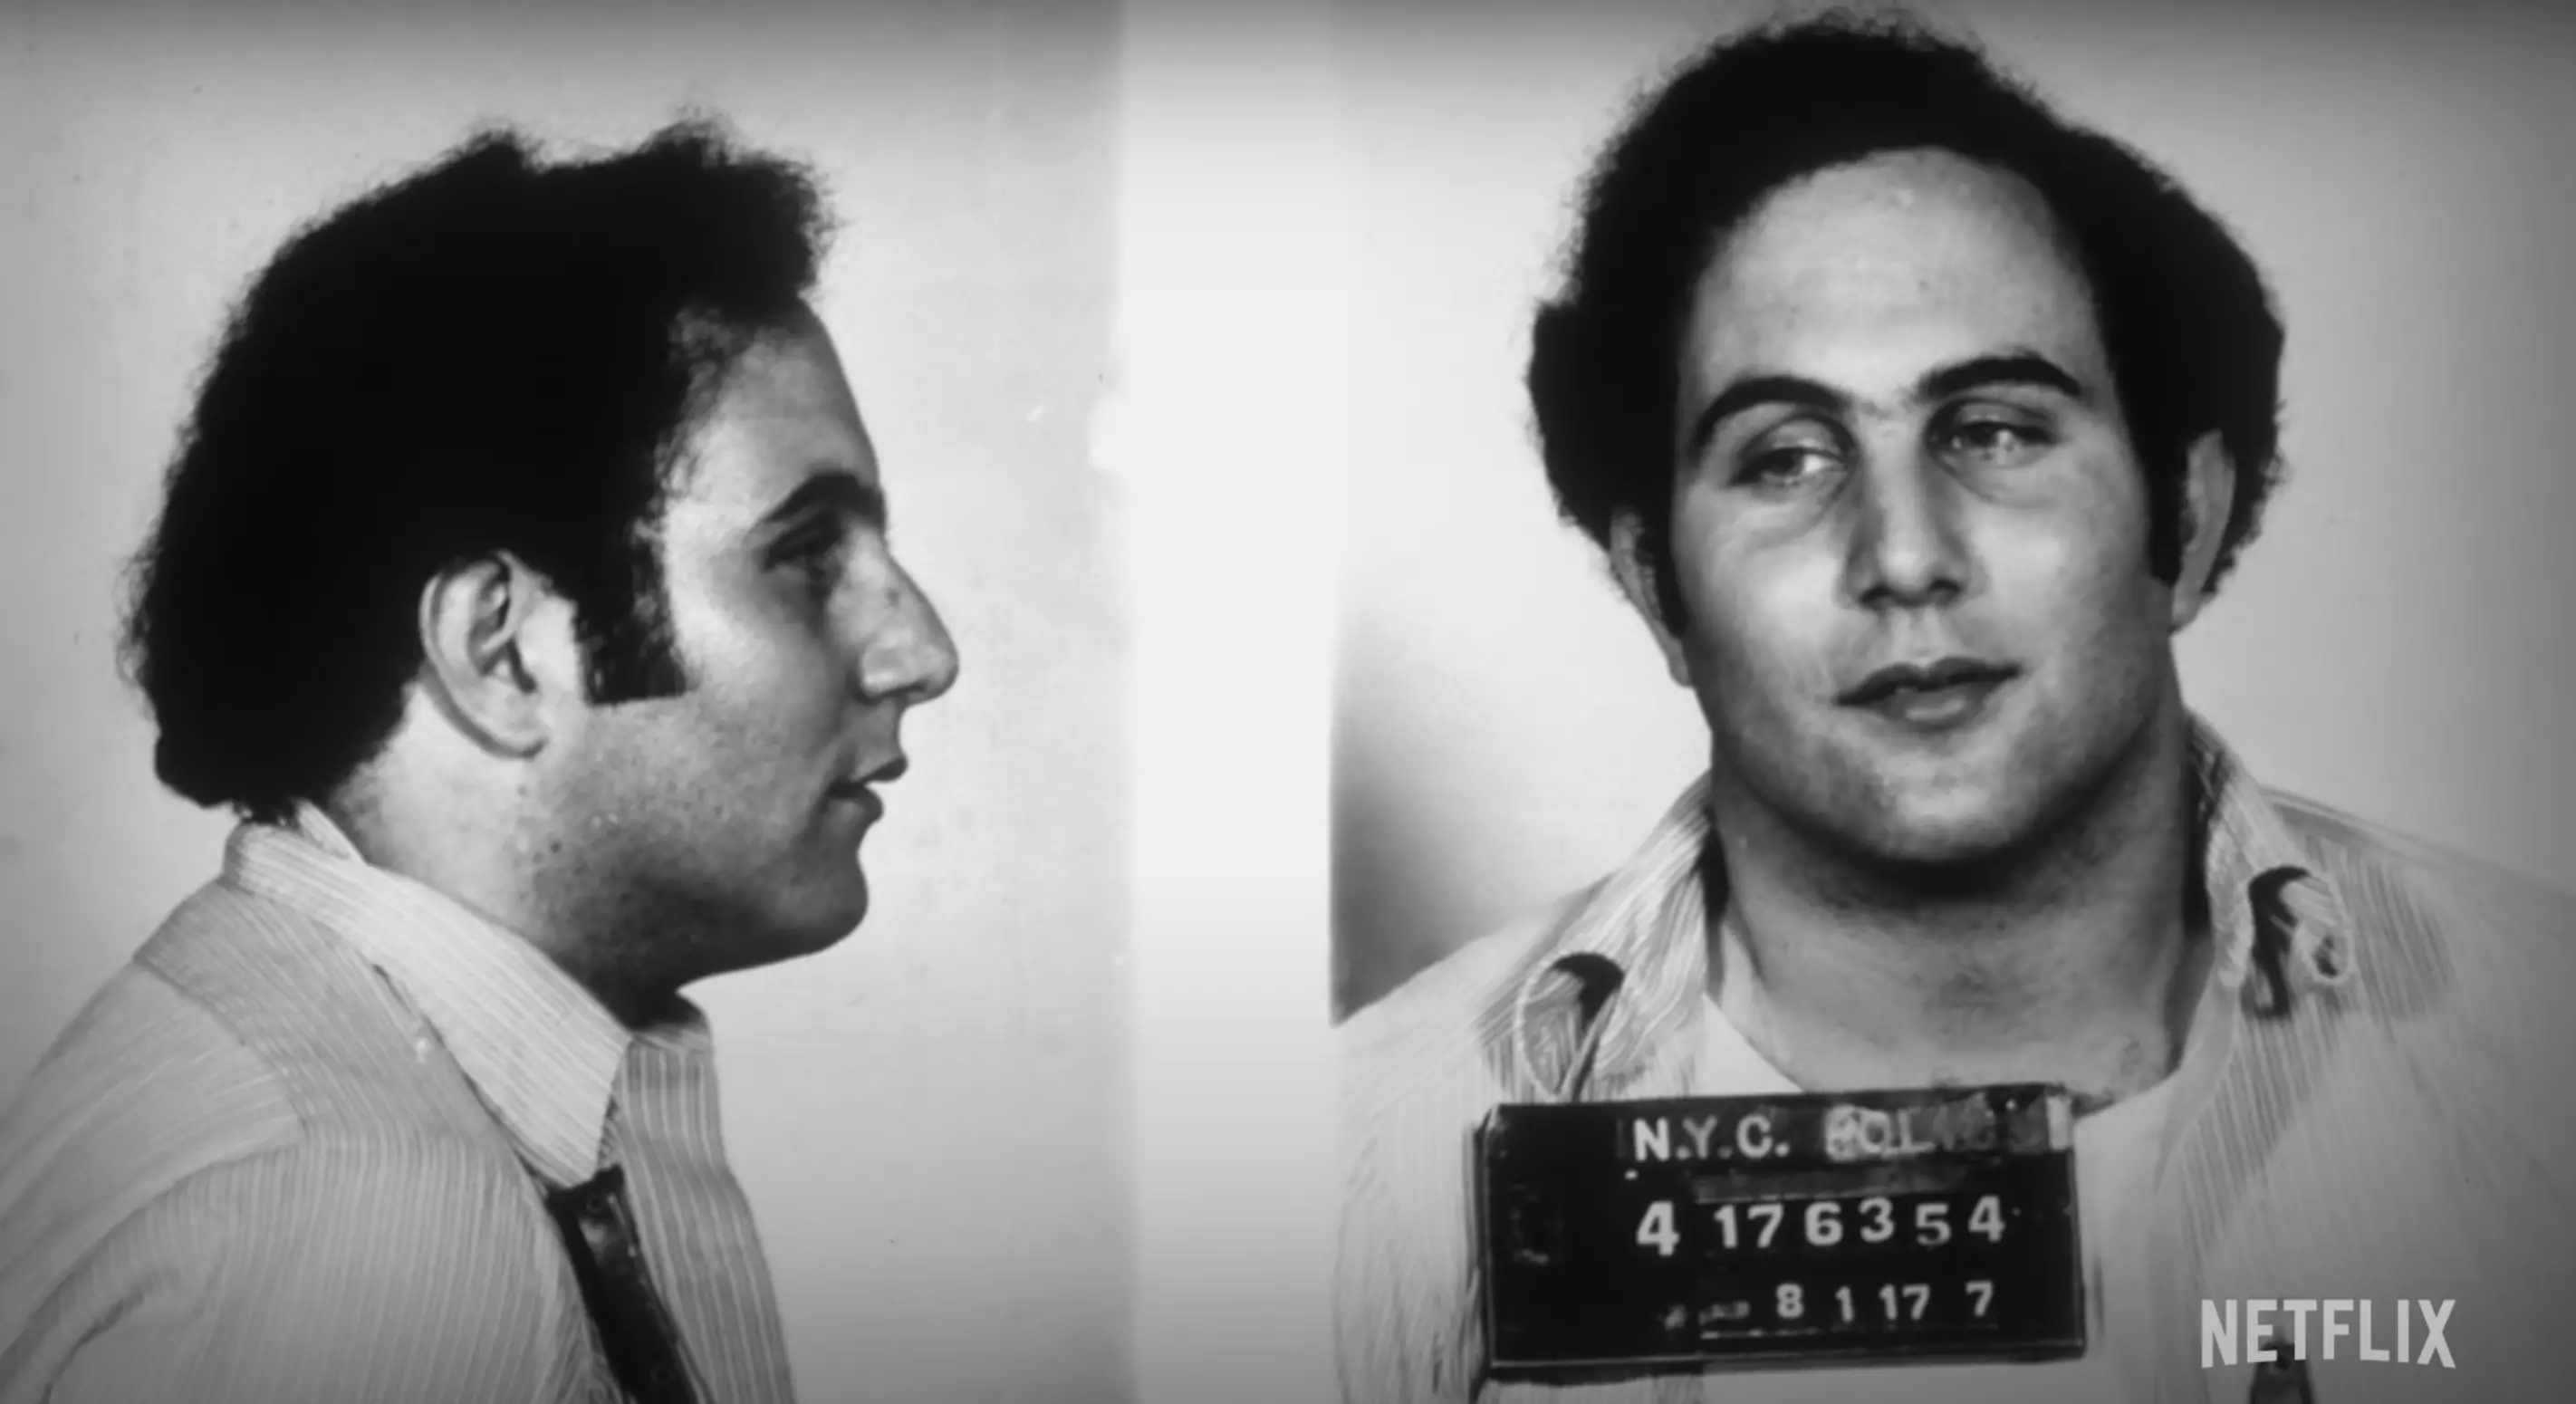 The 'Son of Sam' - aka David Berkowitz - was arrested in August 1977 '